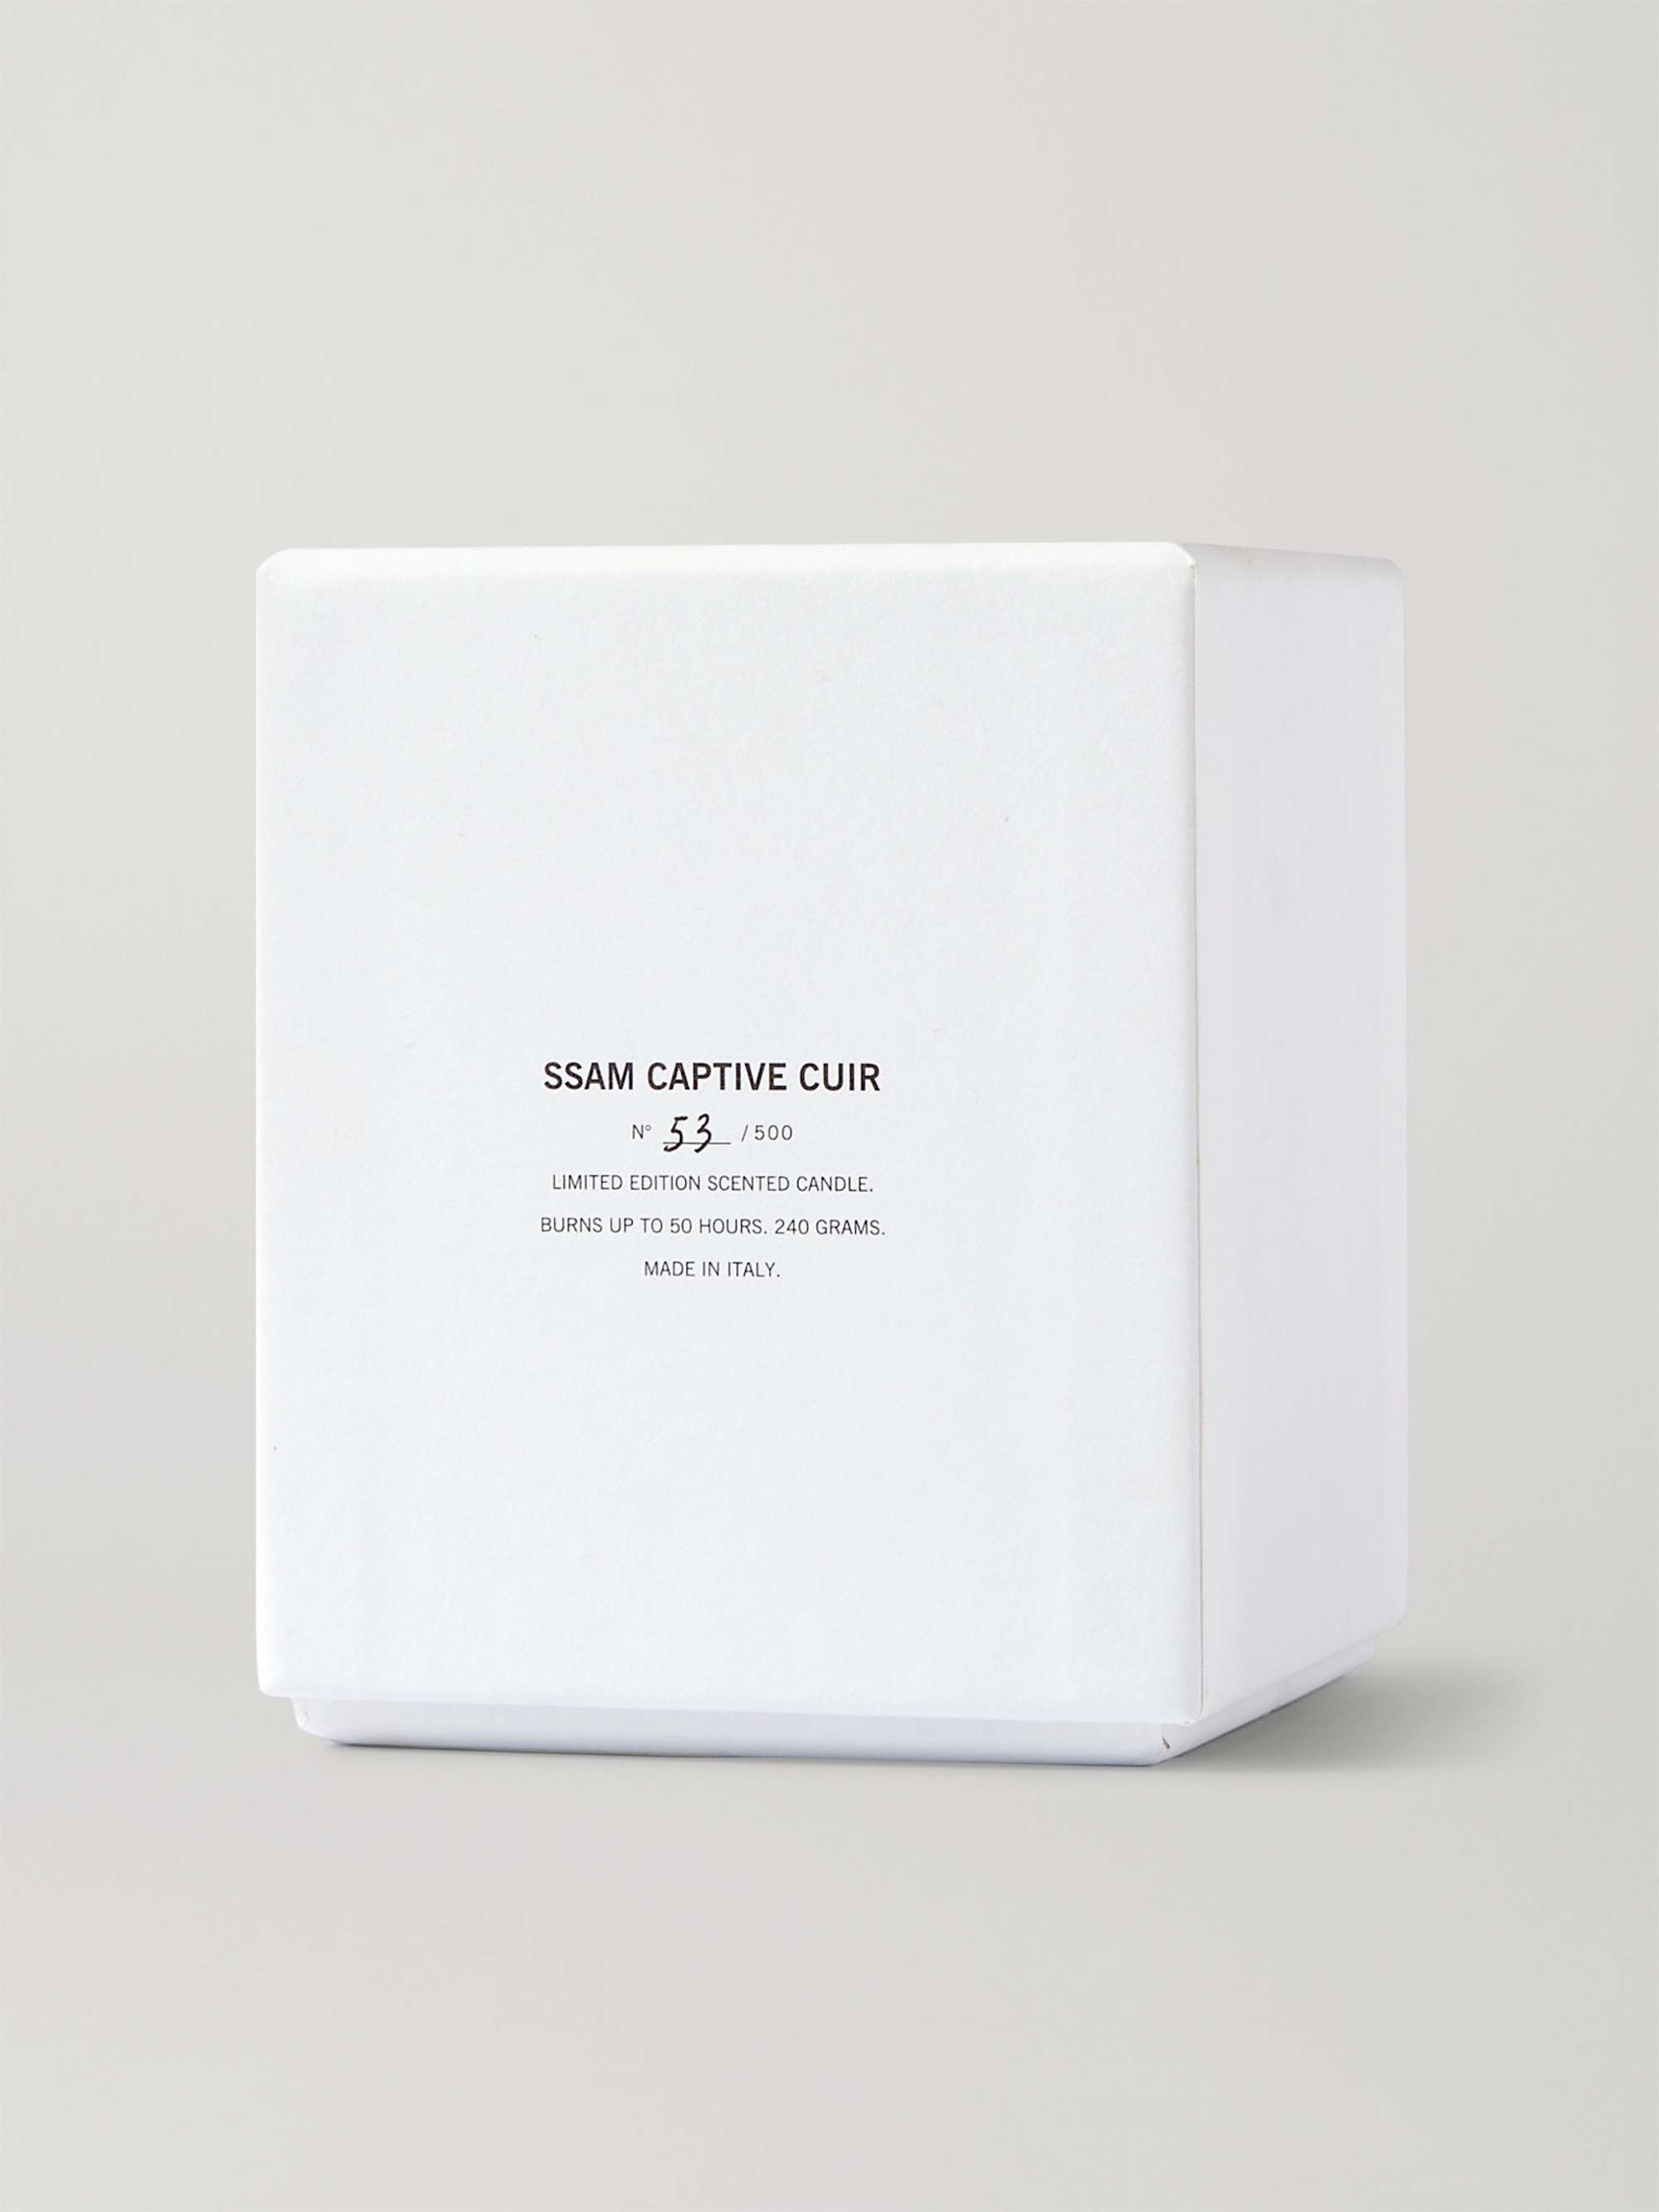 SSAM Captive Cuir Scented Candle, 240g